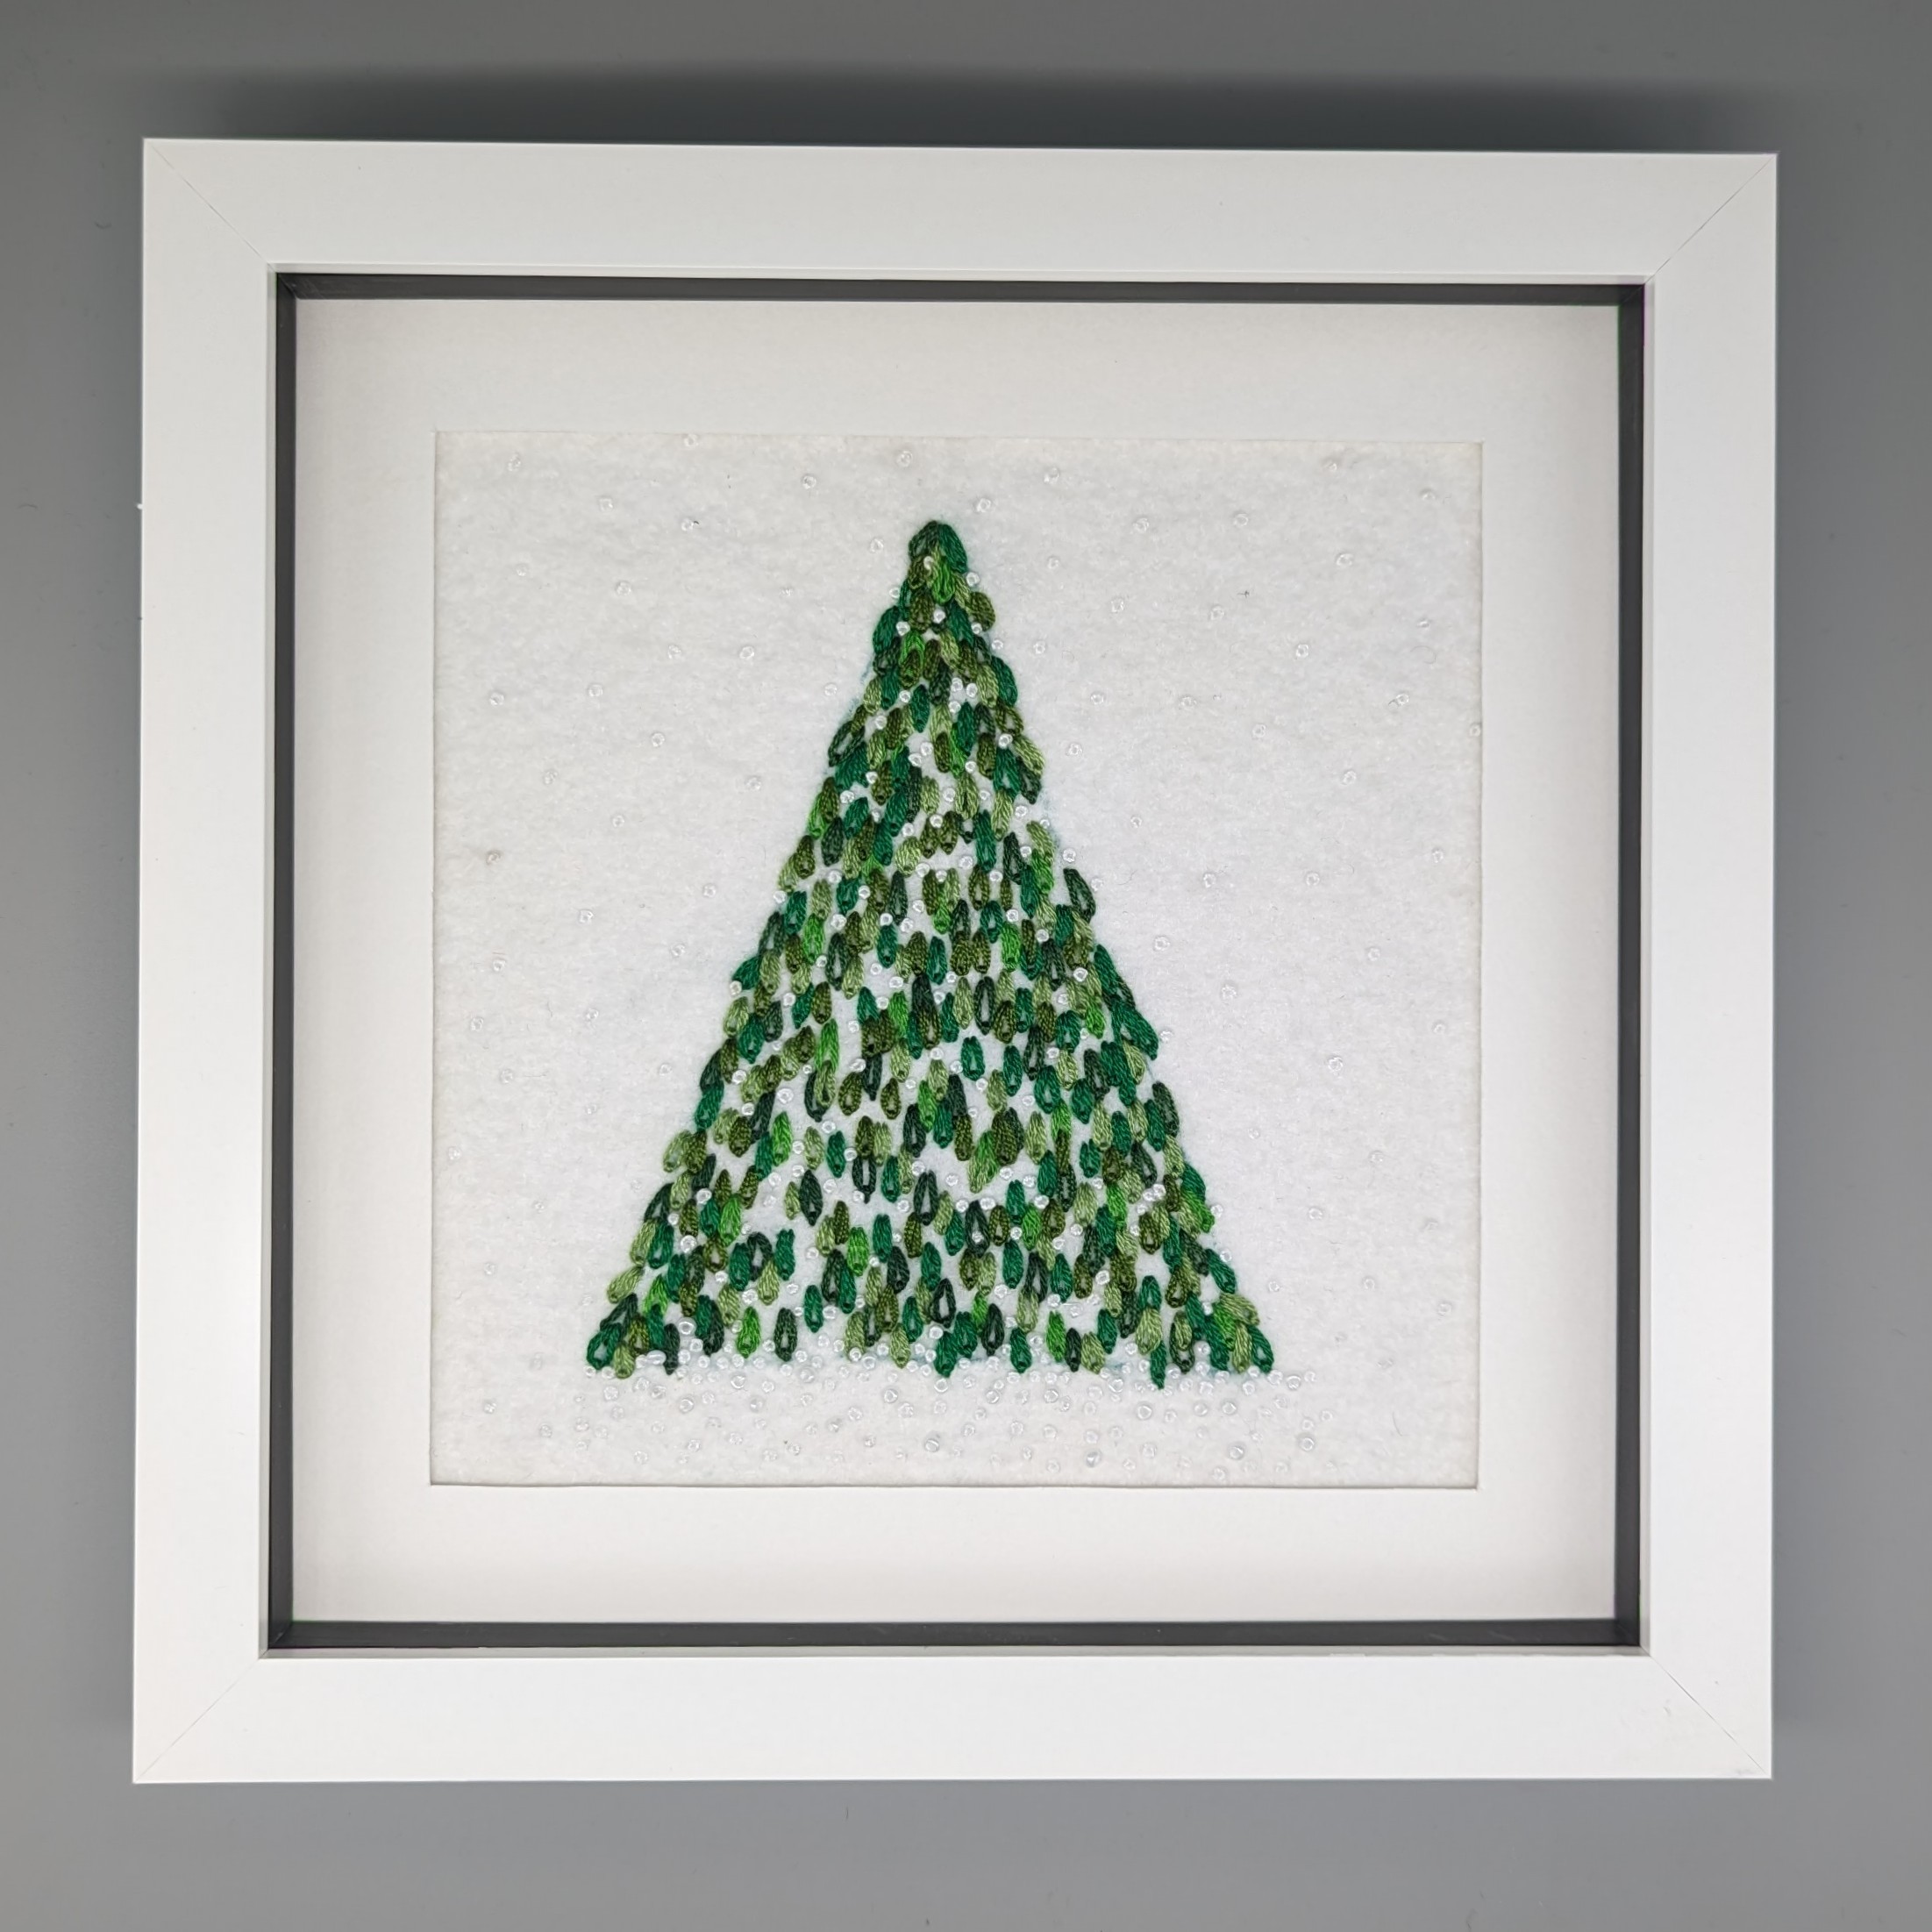 Featured image for “Hand Embroidered and Embellished Christmas Tree”